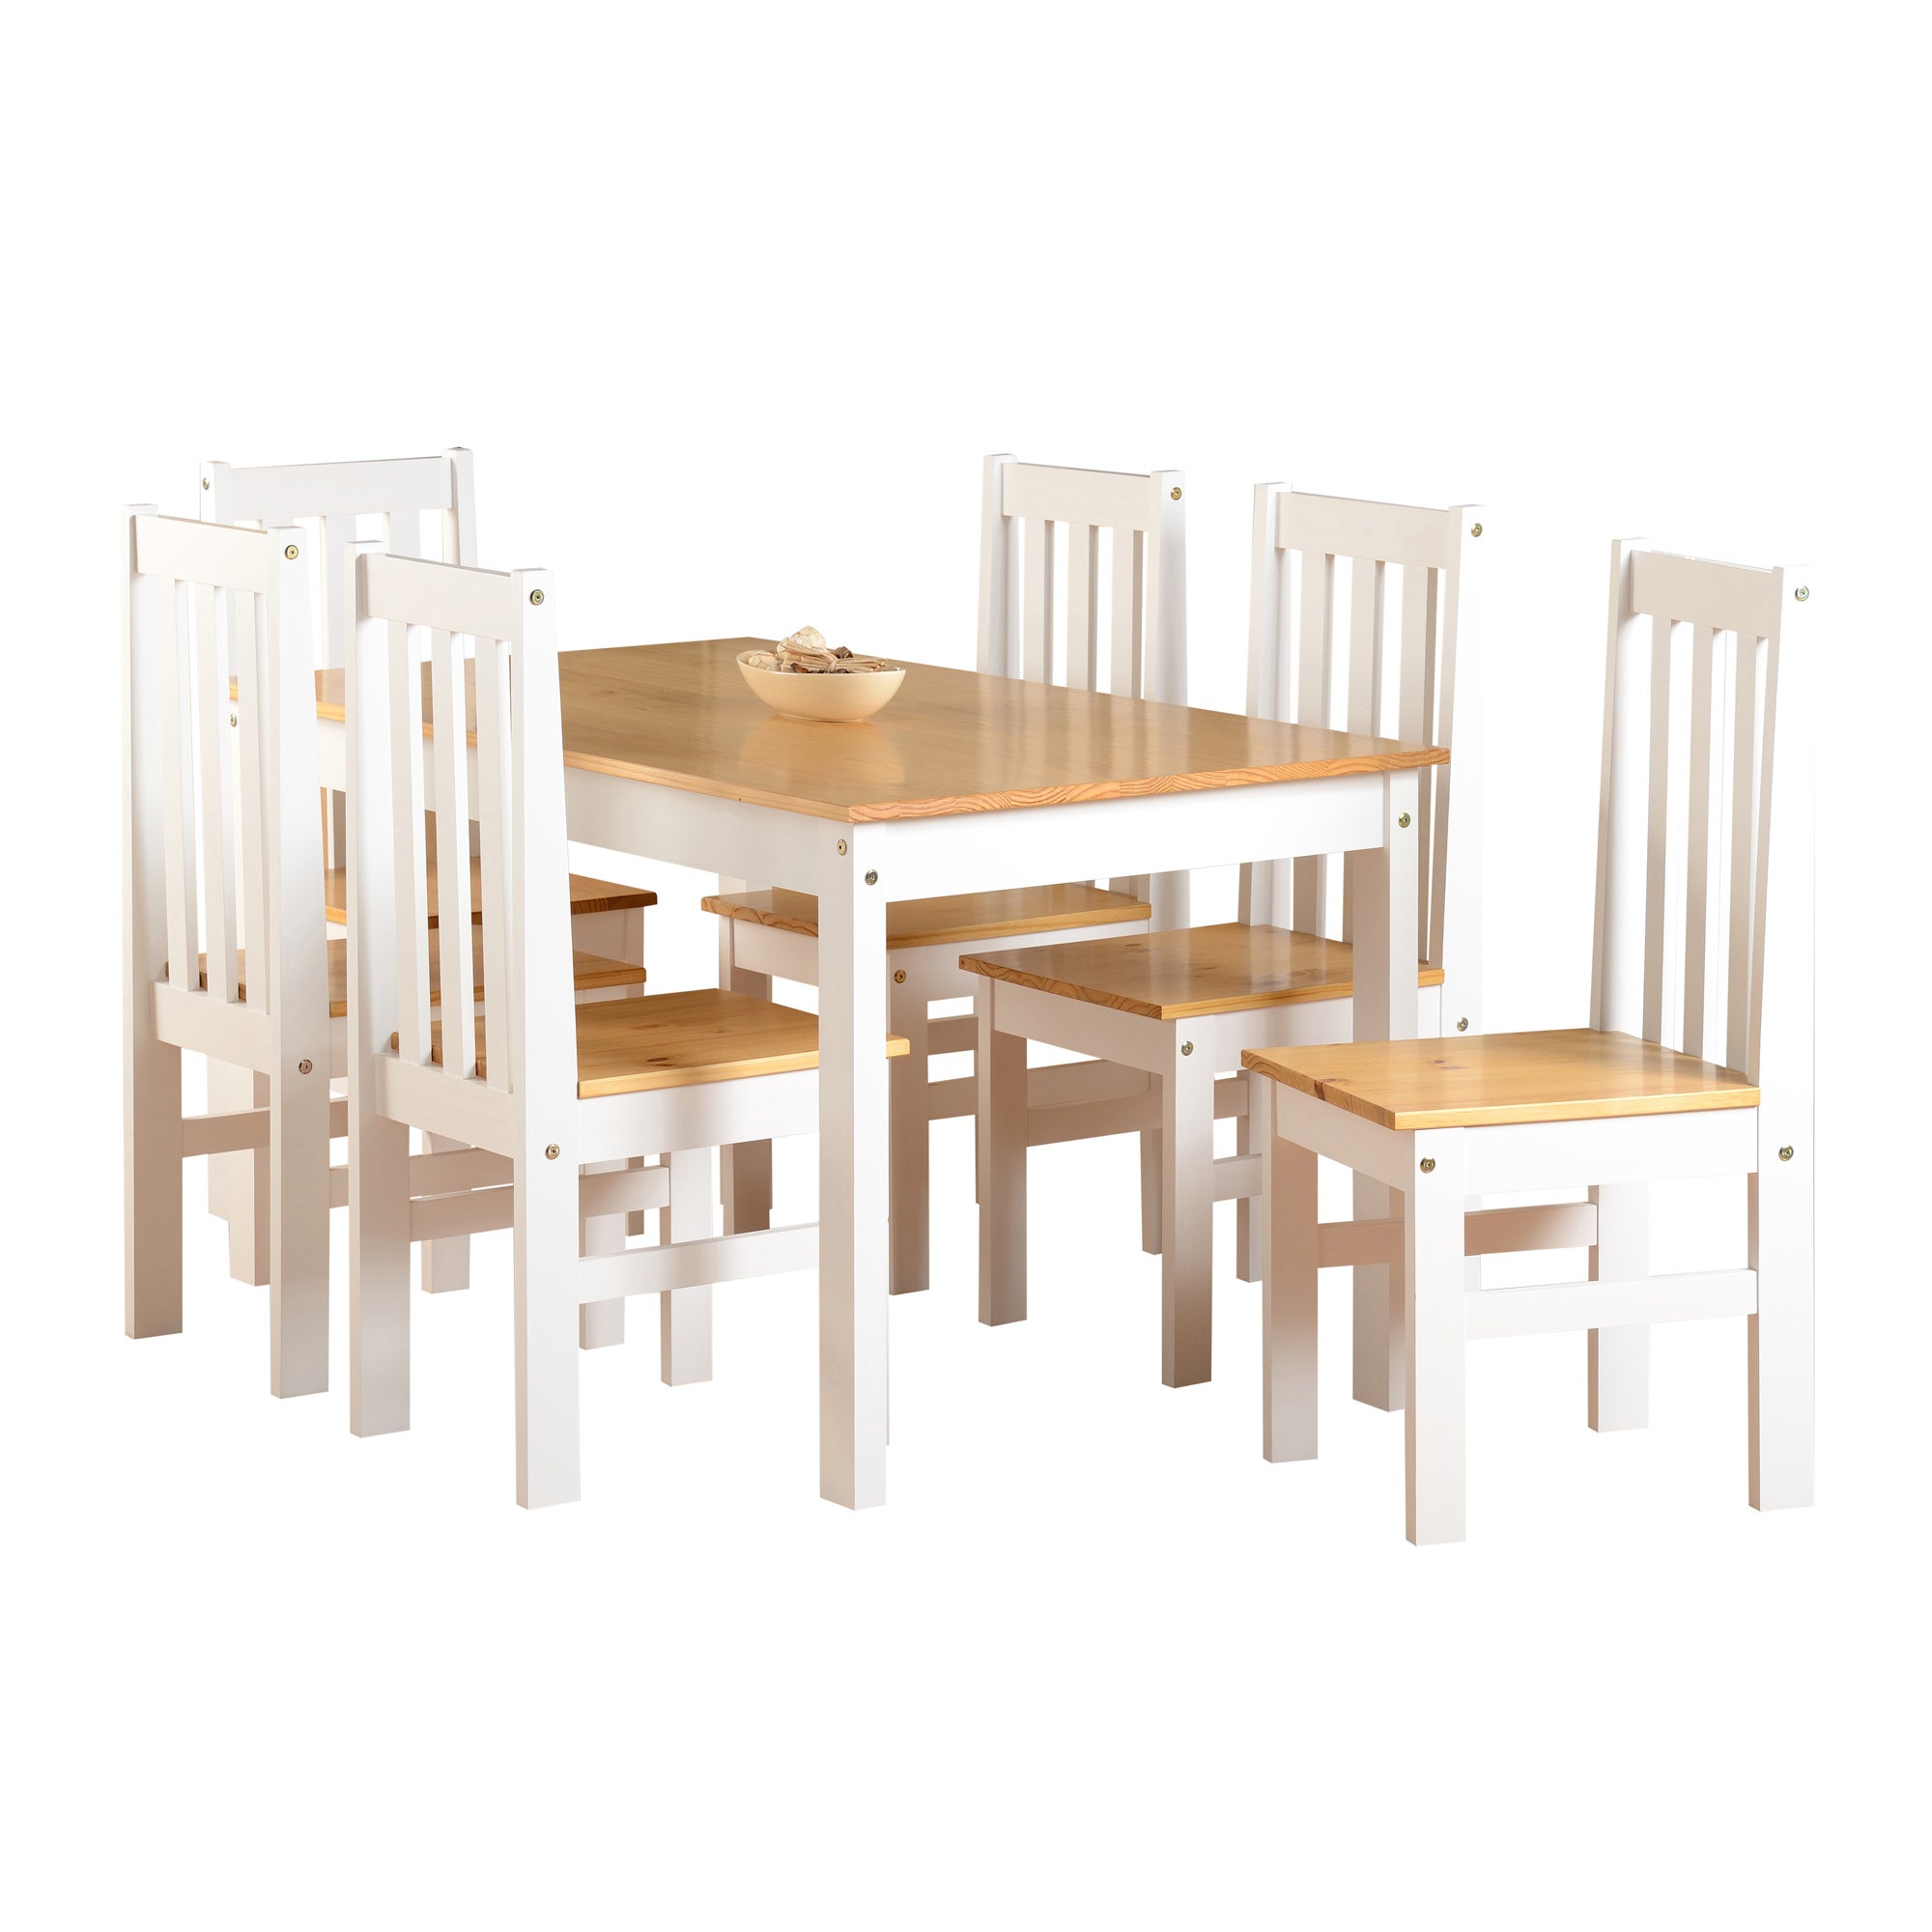 Ludlow Rectangular Dining Table With 6 Chairs White Pine White